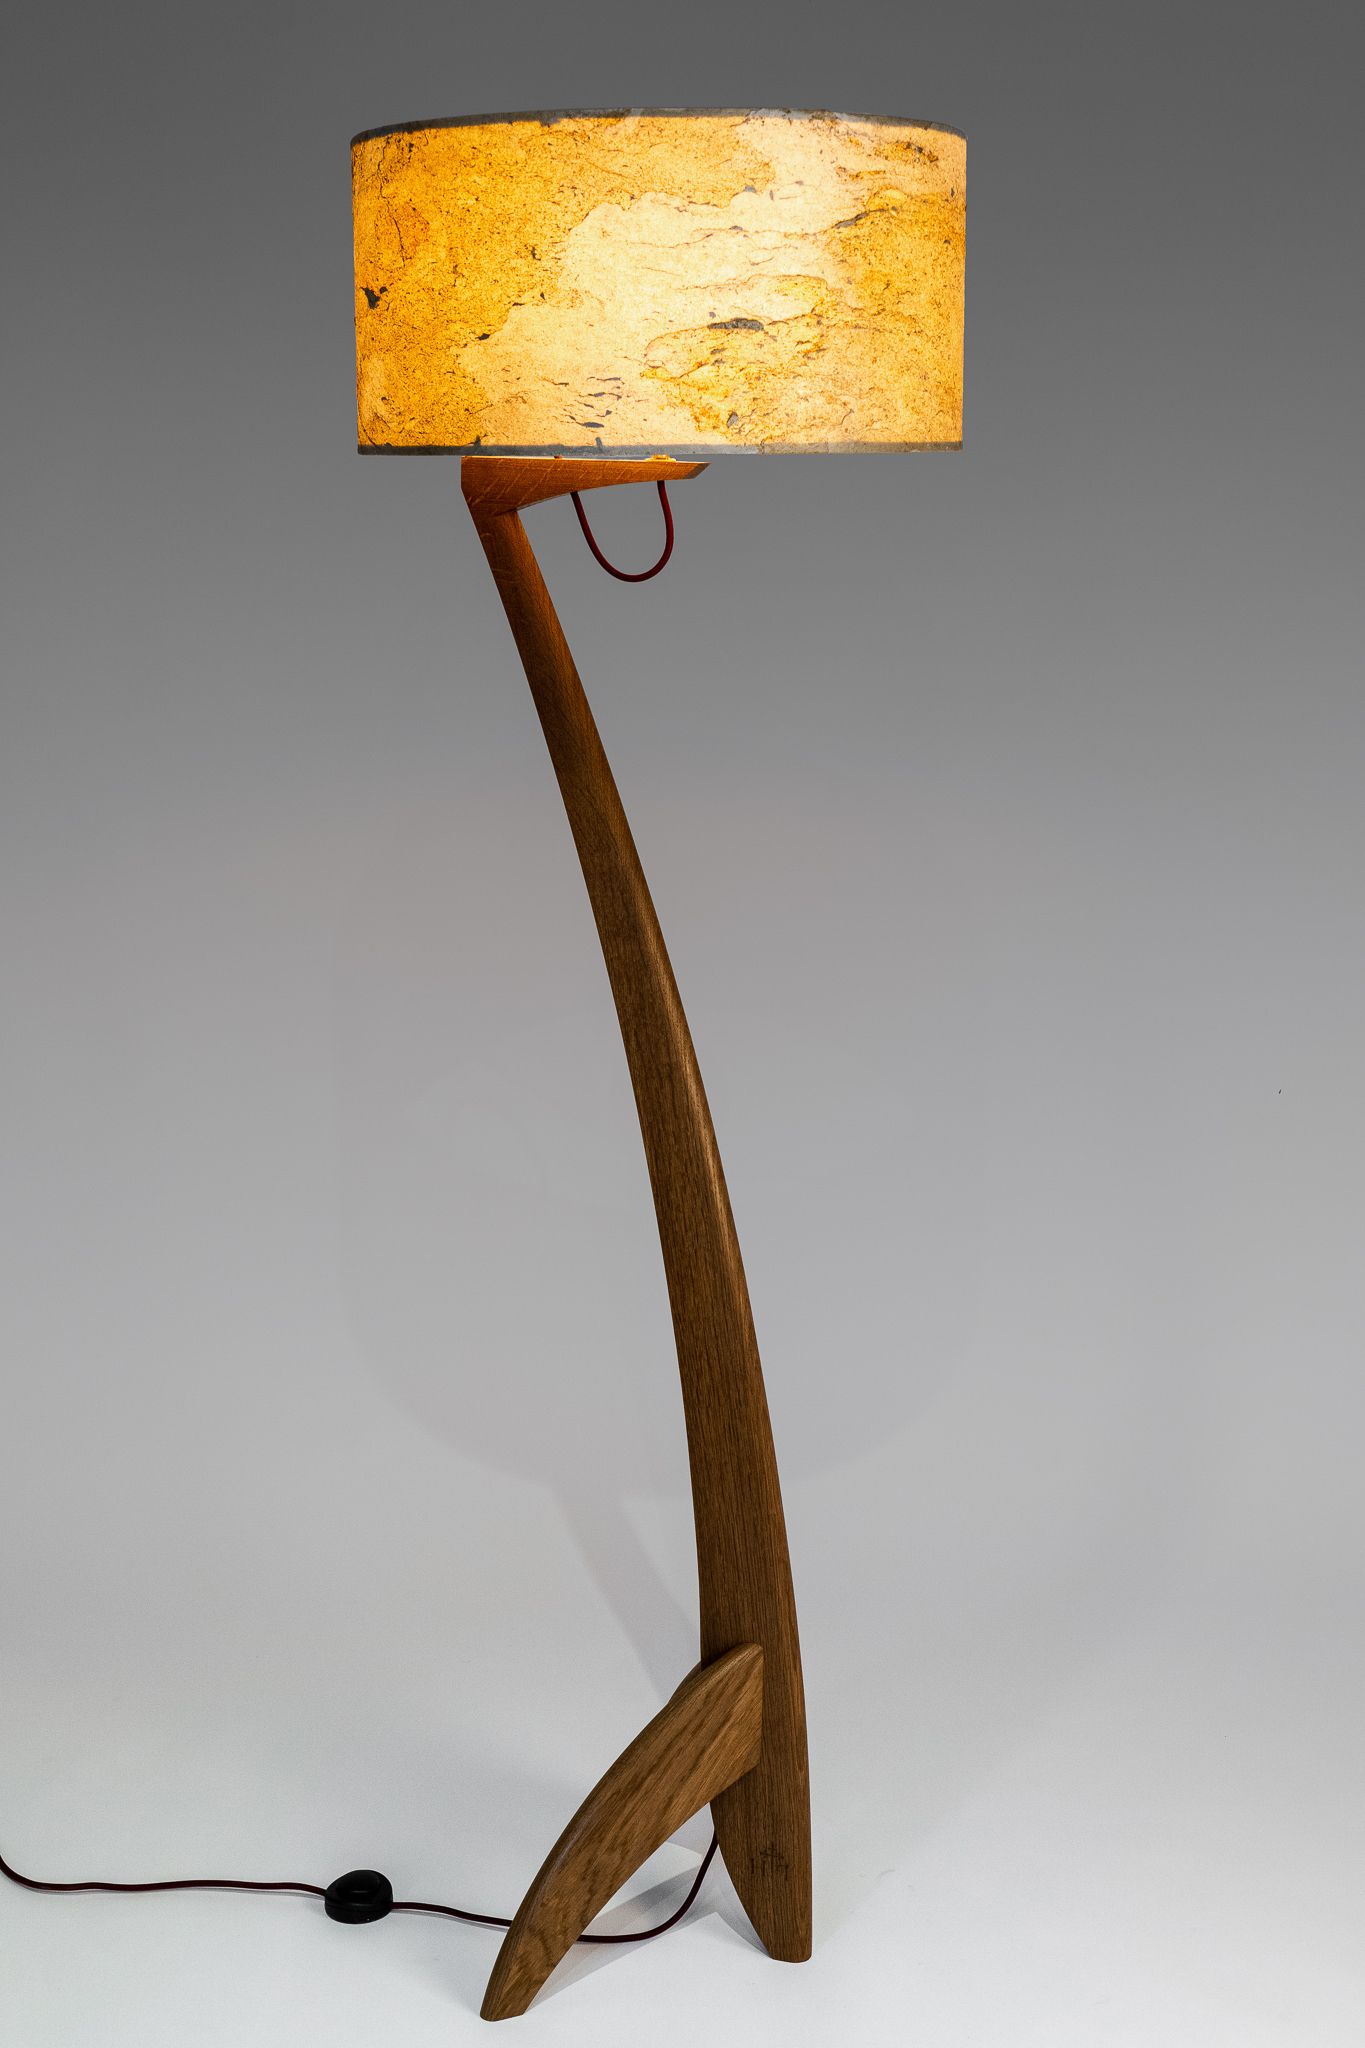 Oak Standing Lamps Intended For Famous Heron Lamp Fumed Oak – Peter Hall & Son – Made In Cumbria (View 6 of 15)